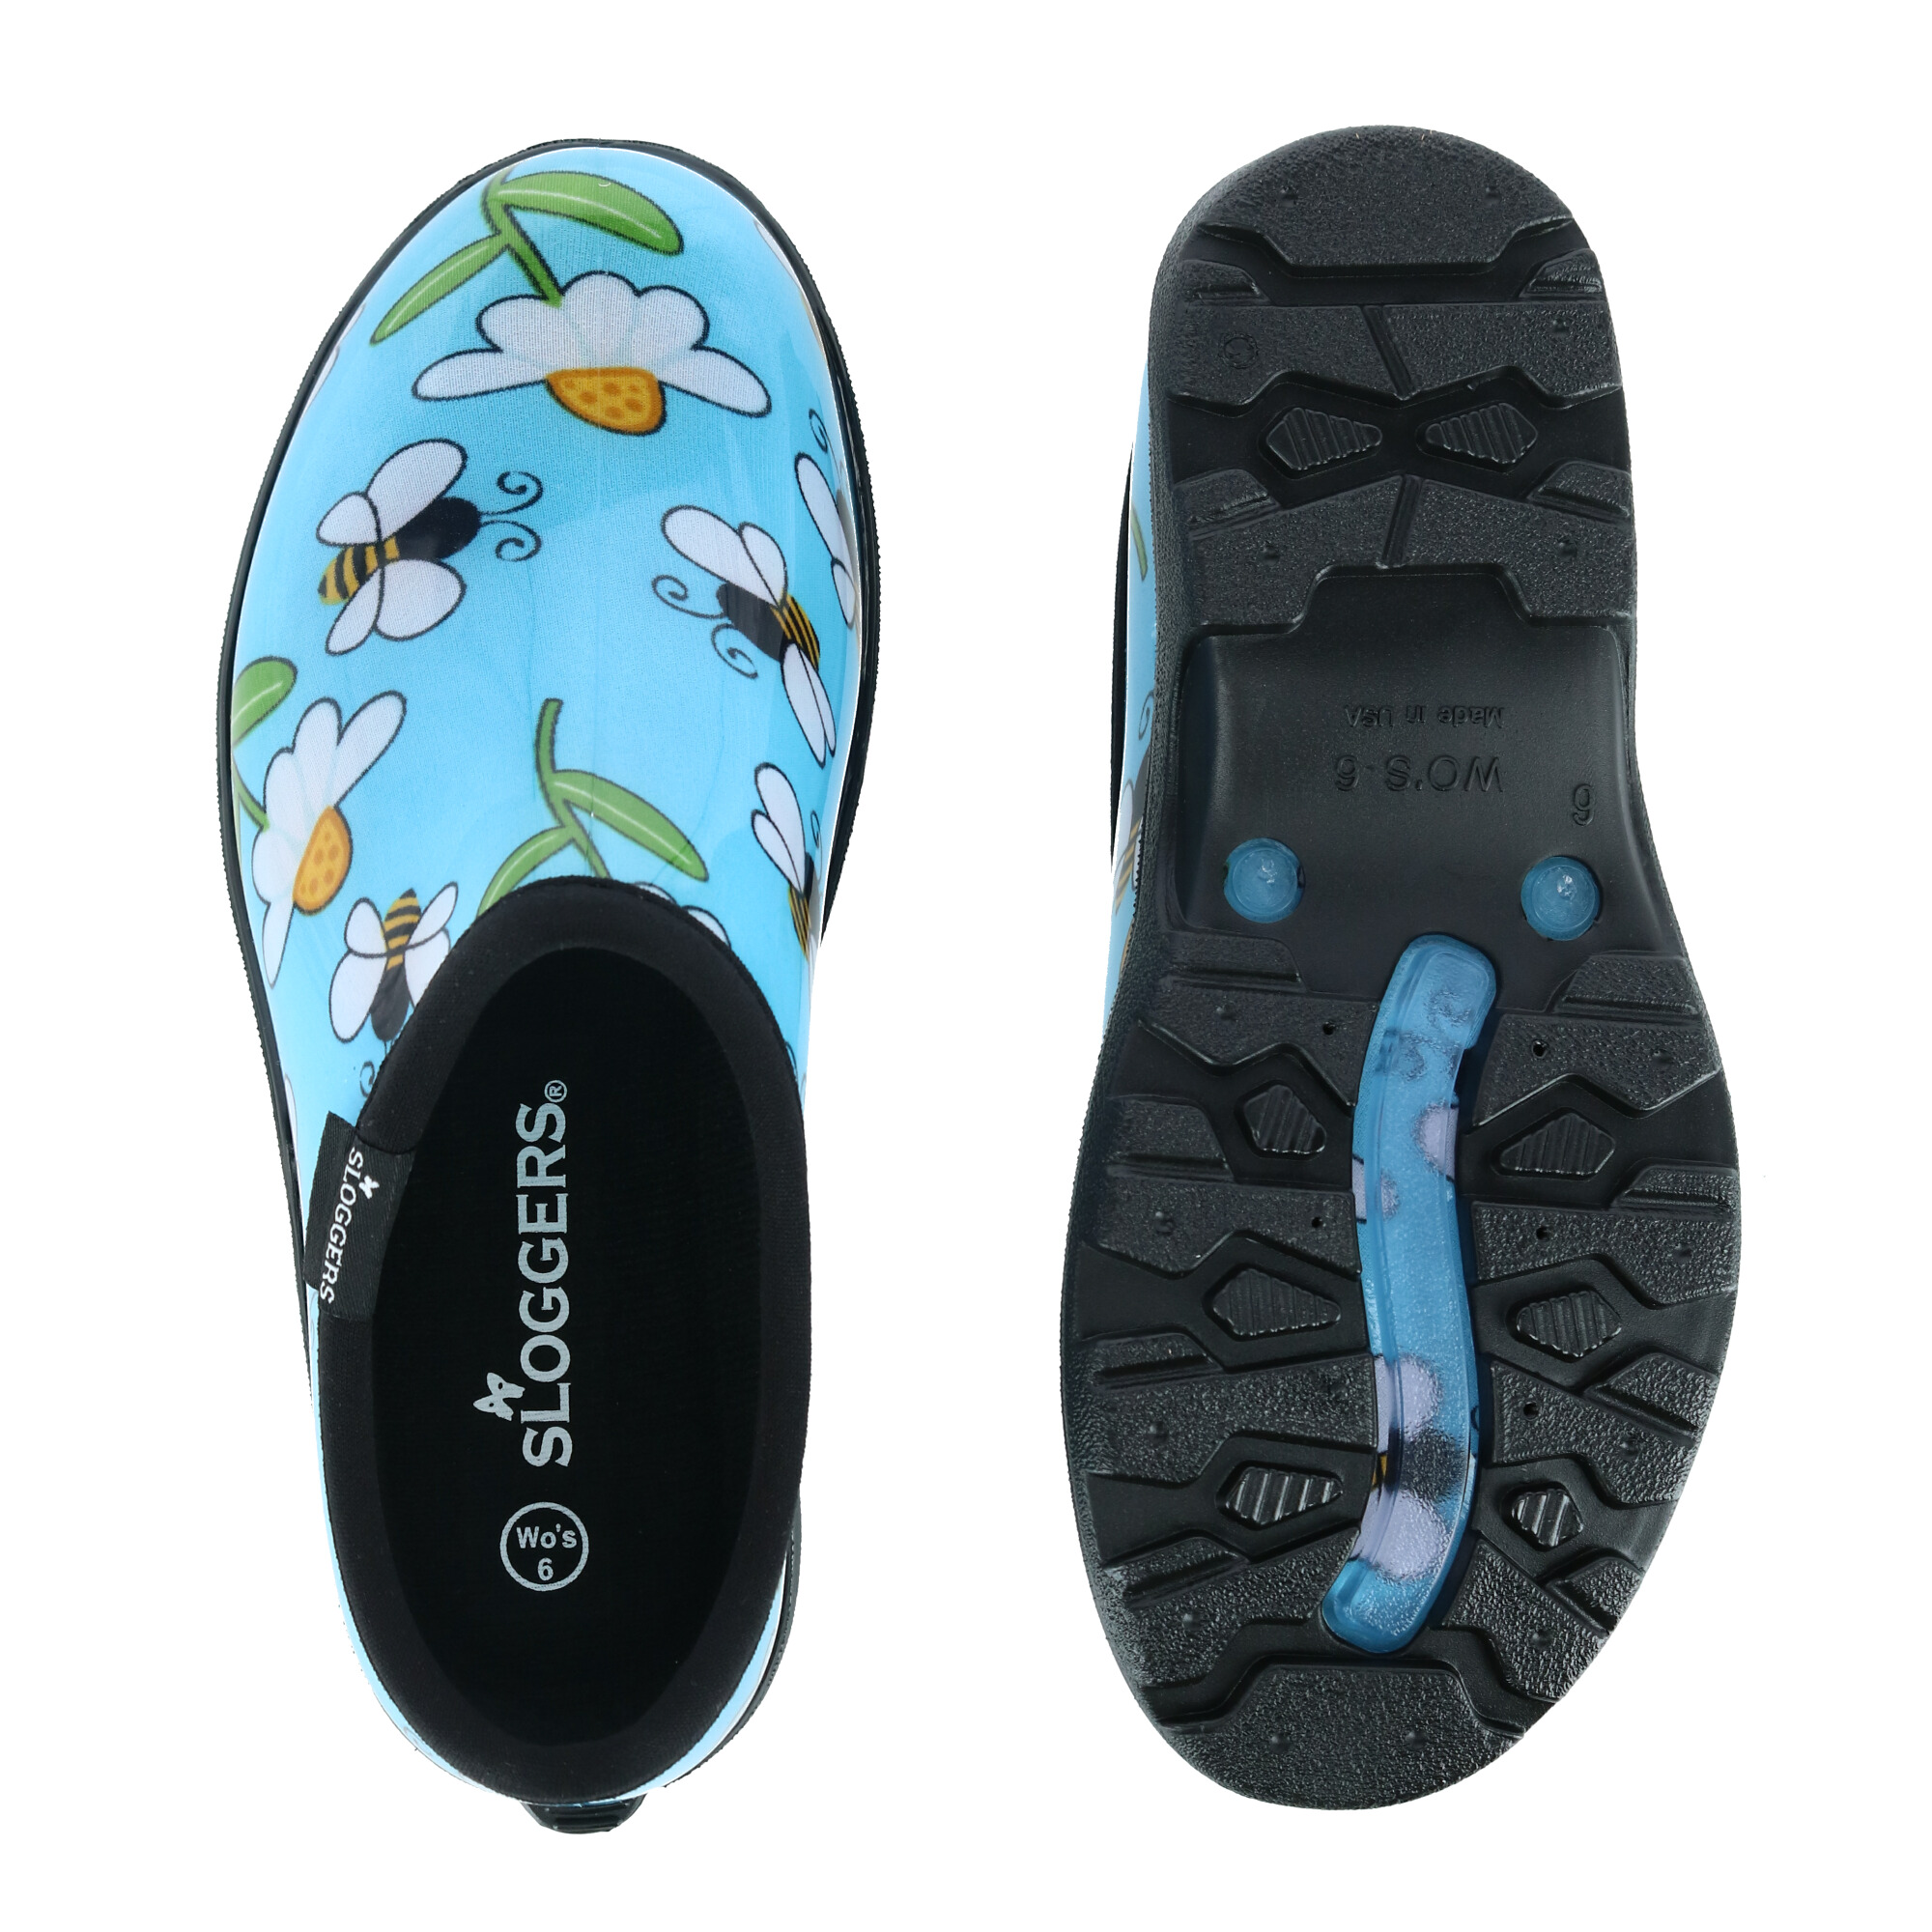 Sloggers Women's Bumble Bee and Flower Print Rain and Garden Shoes